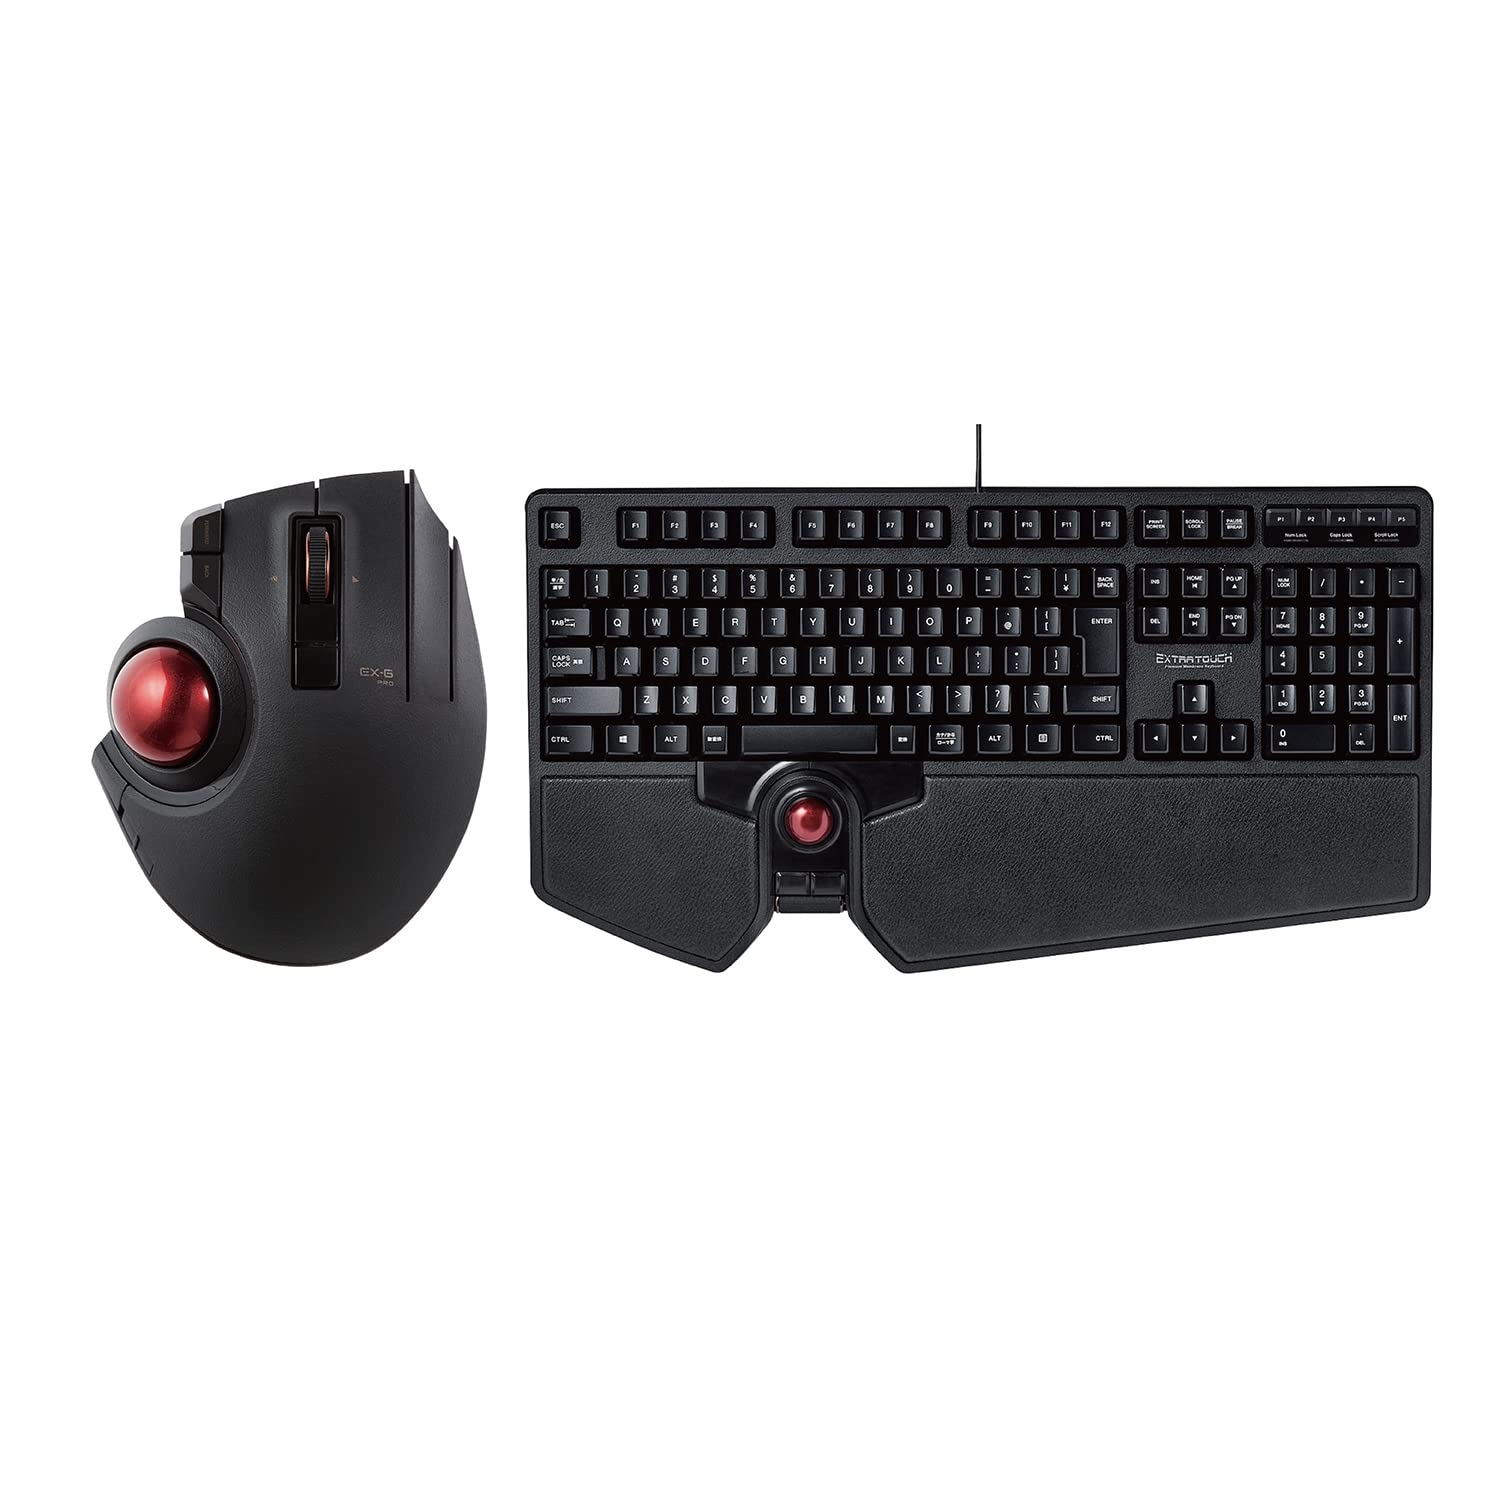 ELECOM Wired/Wireless/Bluetooth Thumb-Operated Trackball Mouse & Wired Japanese Layout Keyboard with Built-in Optical Trackball Mouse & Scroll Wheel